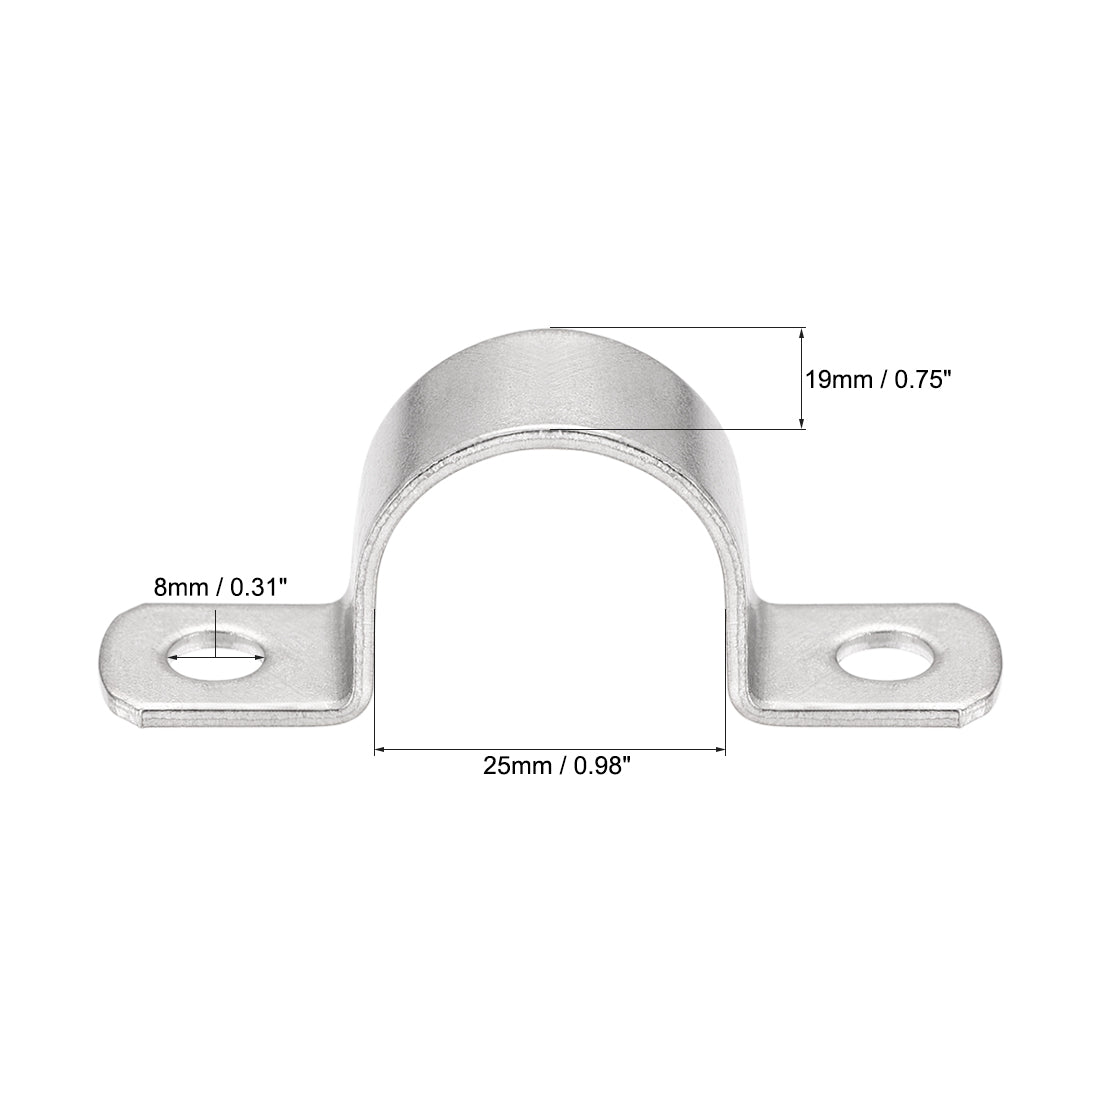 uxcell Uxcell Rigid Pipe Strap, 2 Holes Tube Straps 304 Stainless Steel Tension Tube Clamp 2pcs